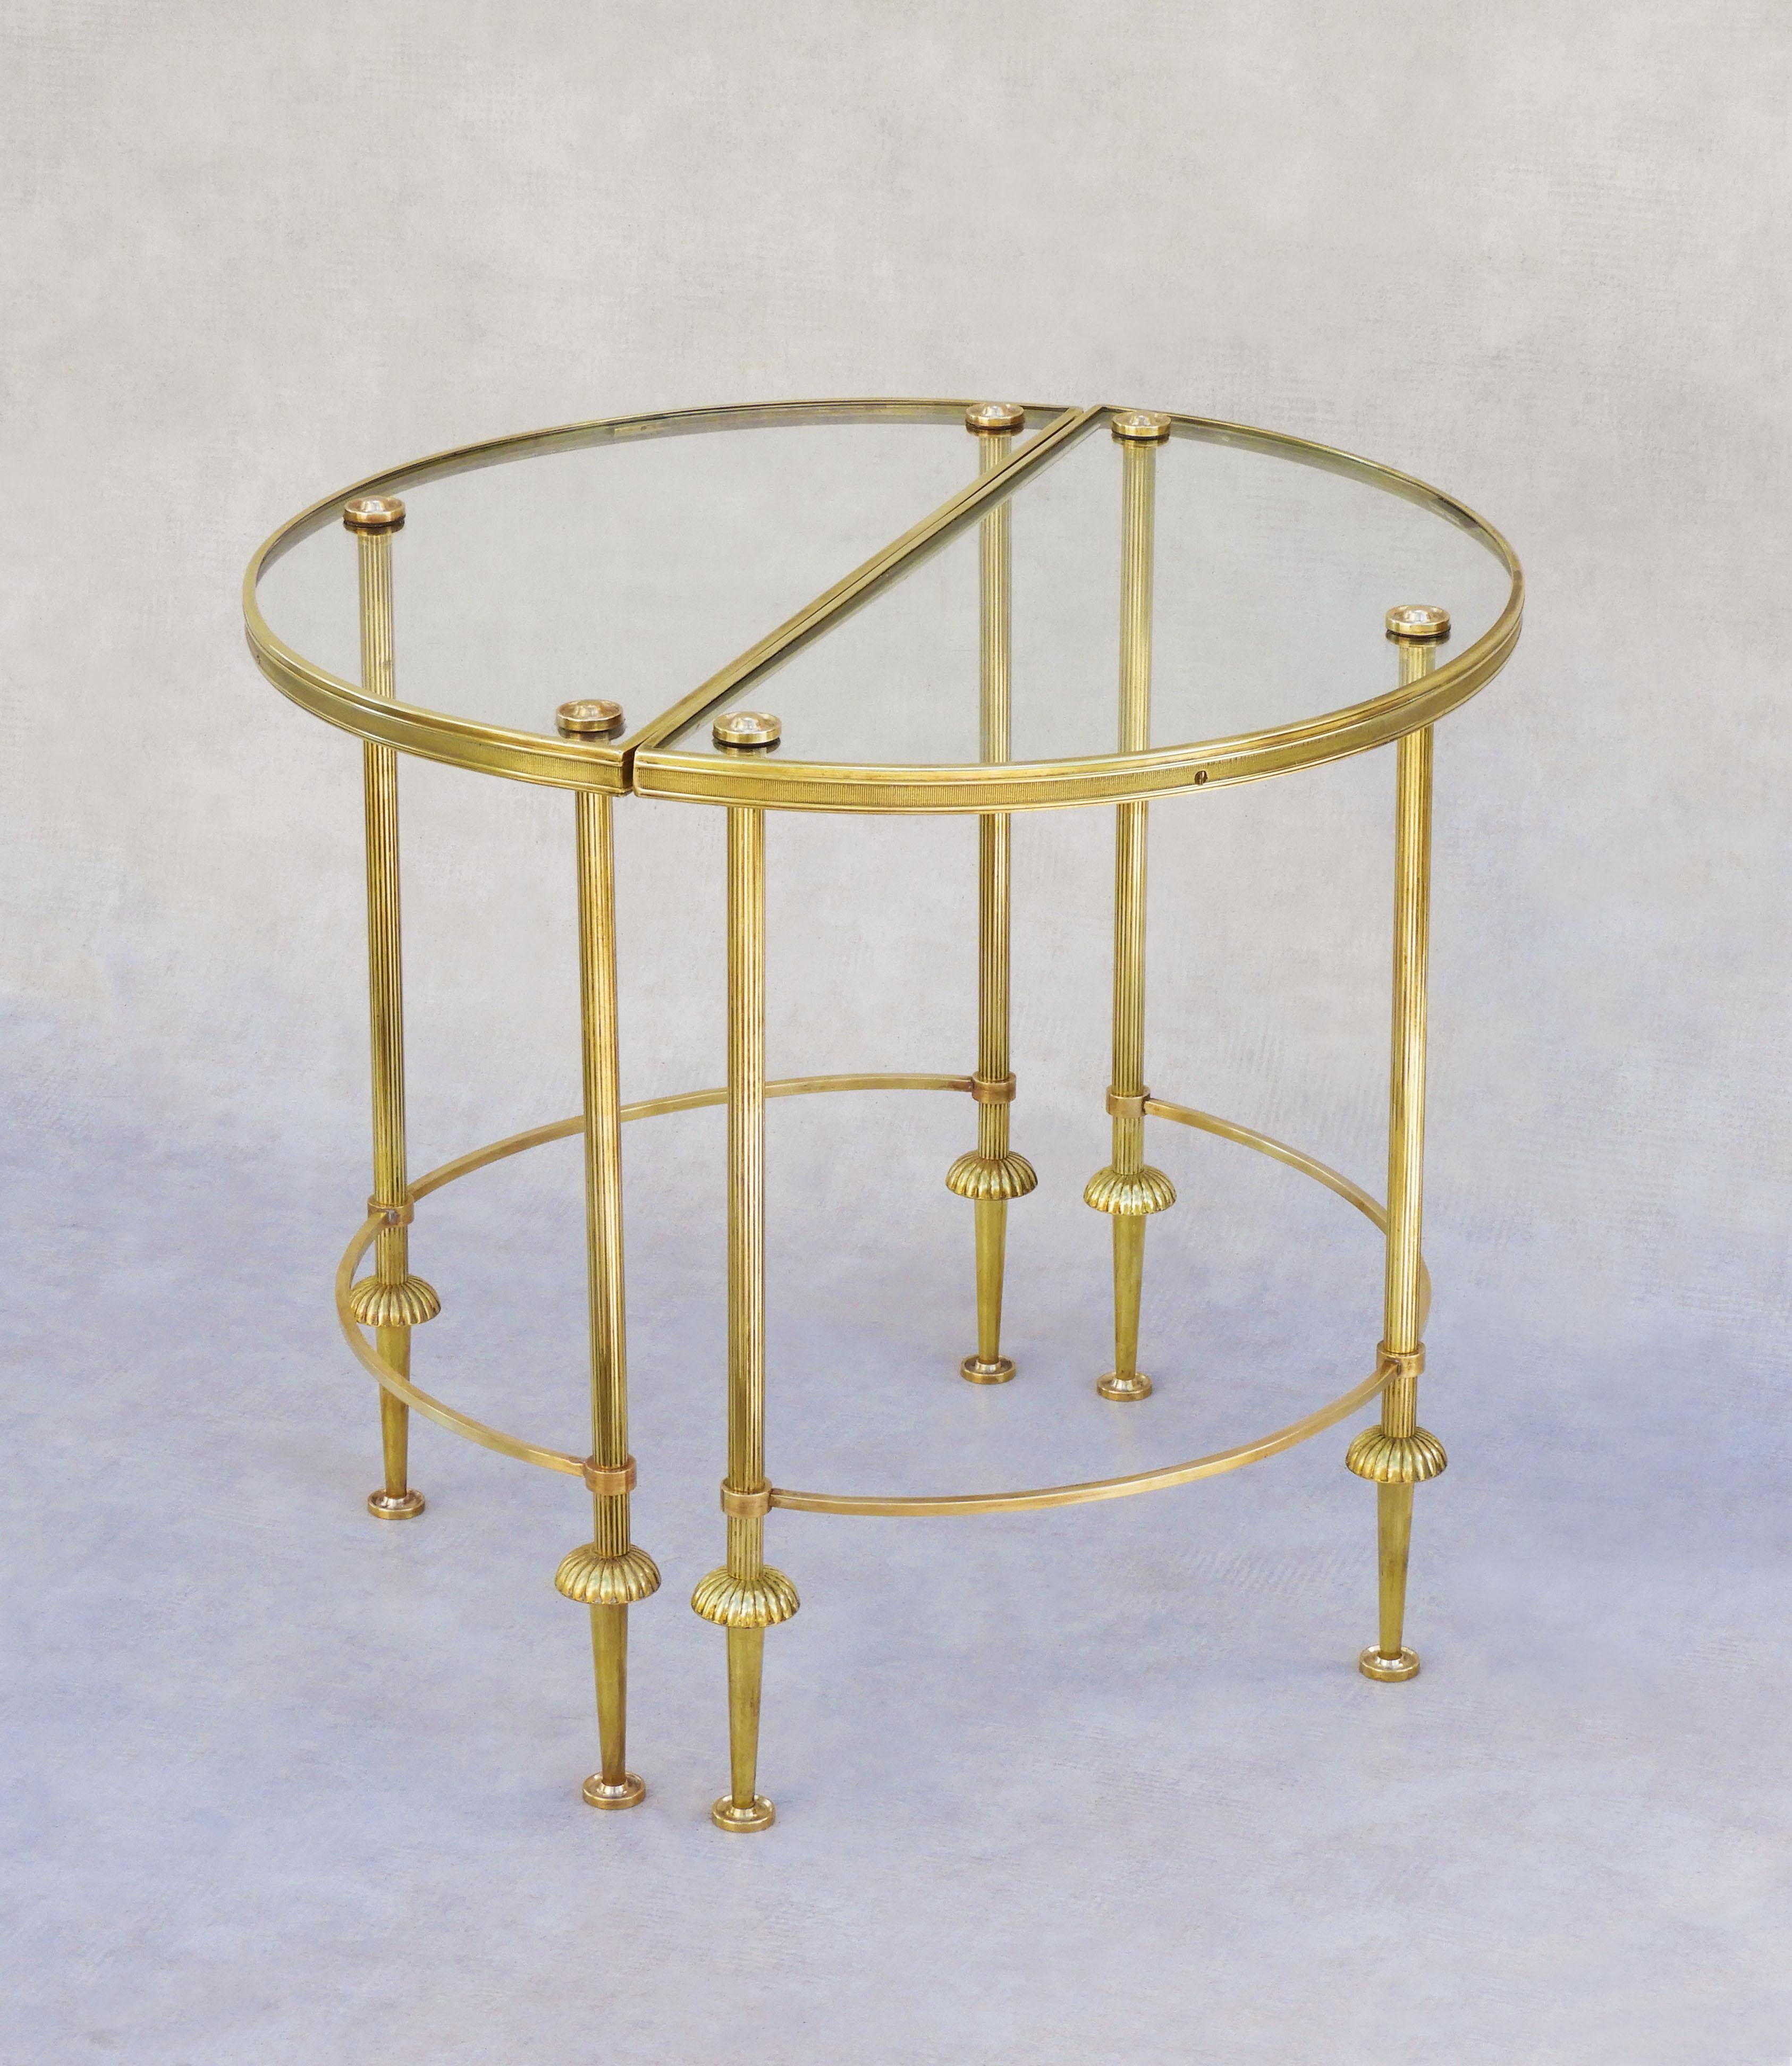 A charming pair of mid-century neoclassical brass & glass demi-lune Tables C1950s attributed to Maison Baguès.  Each table stands on three fluted legs with tapered feet, a curved stretcher reflects the shape of the half-moon glass top, which is